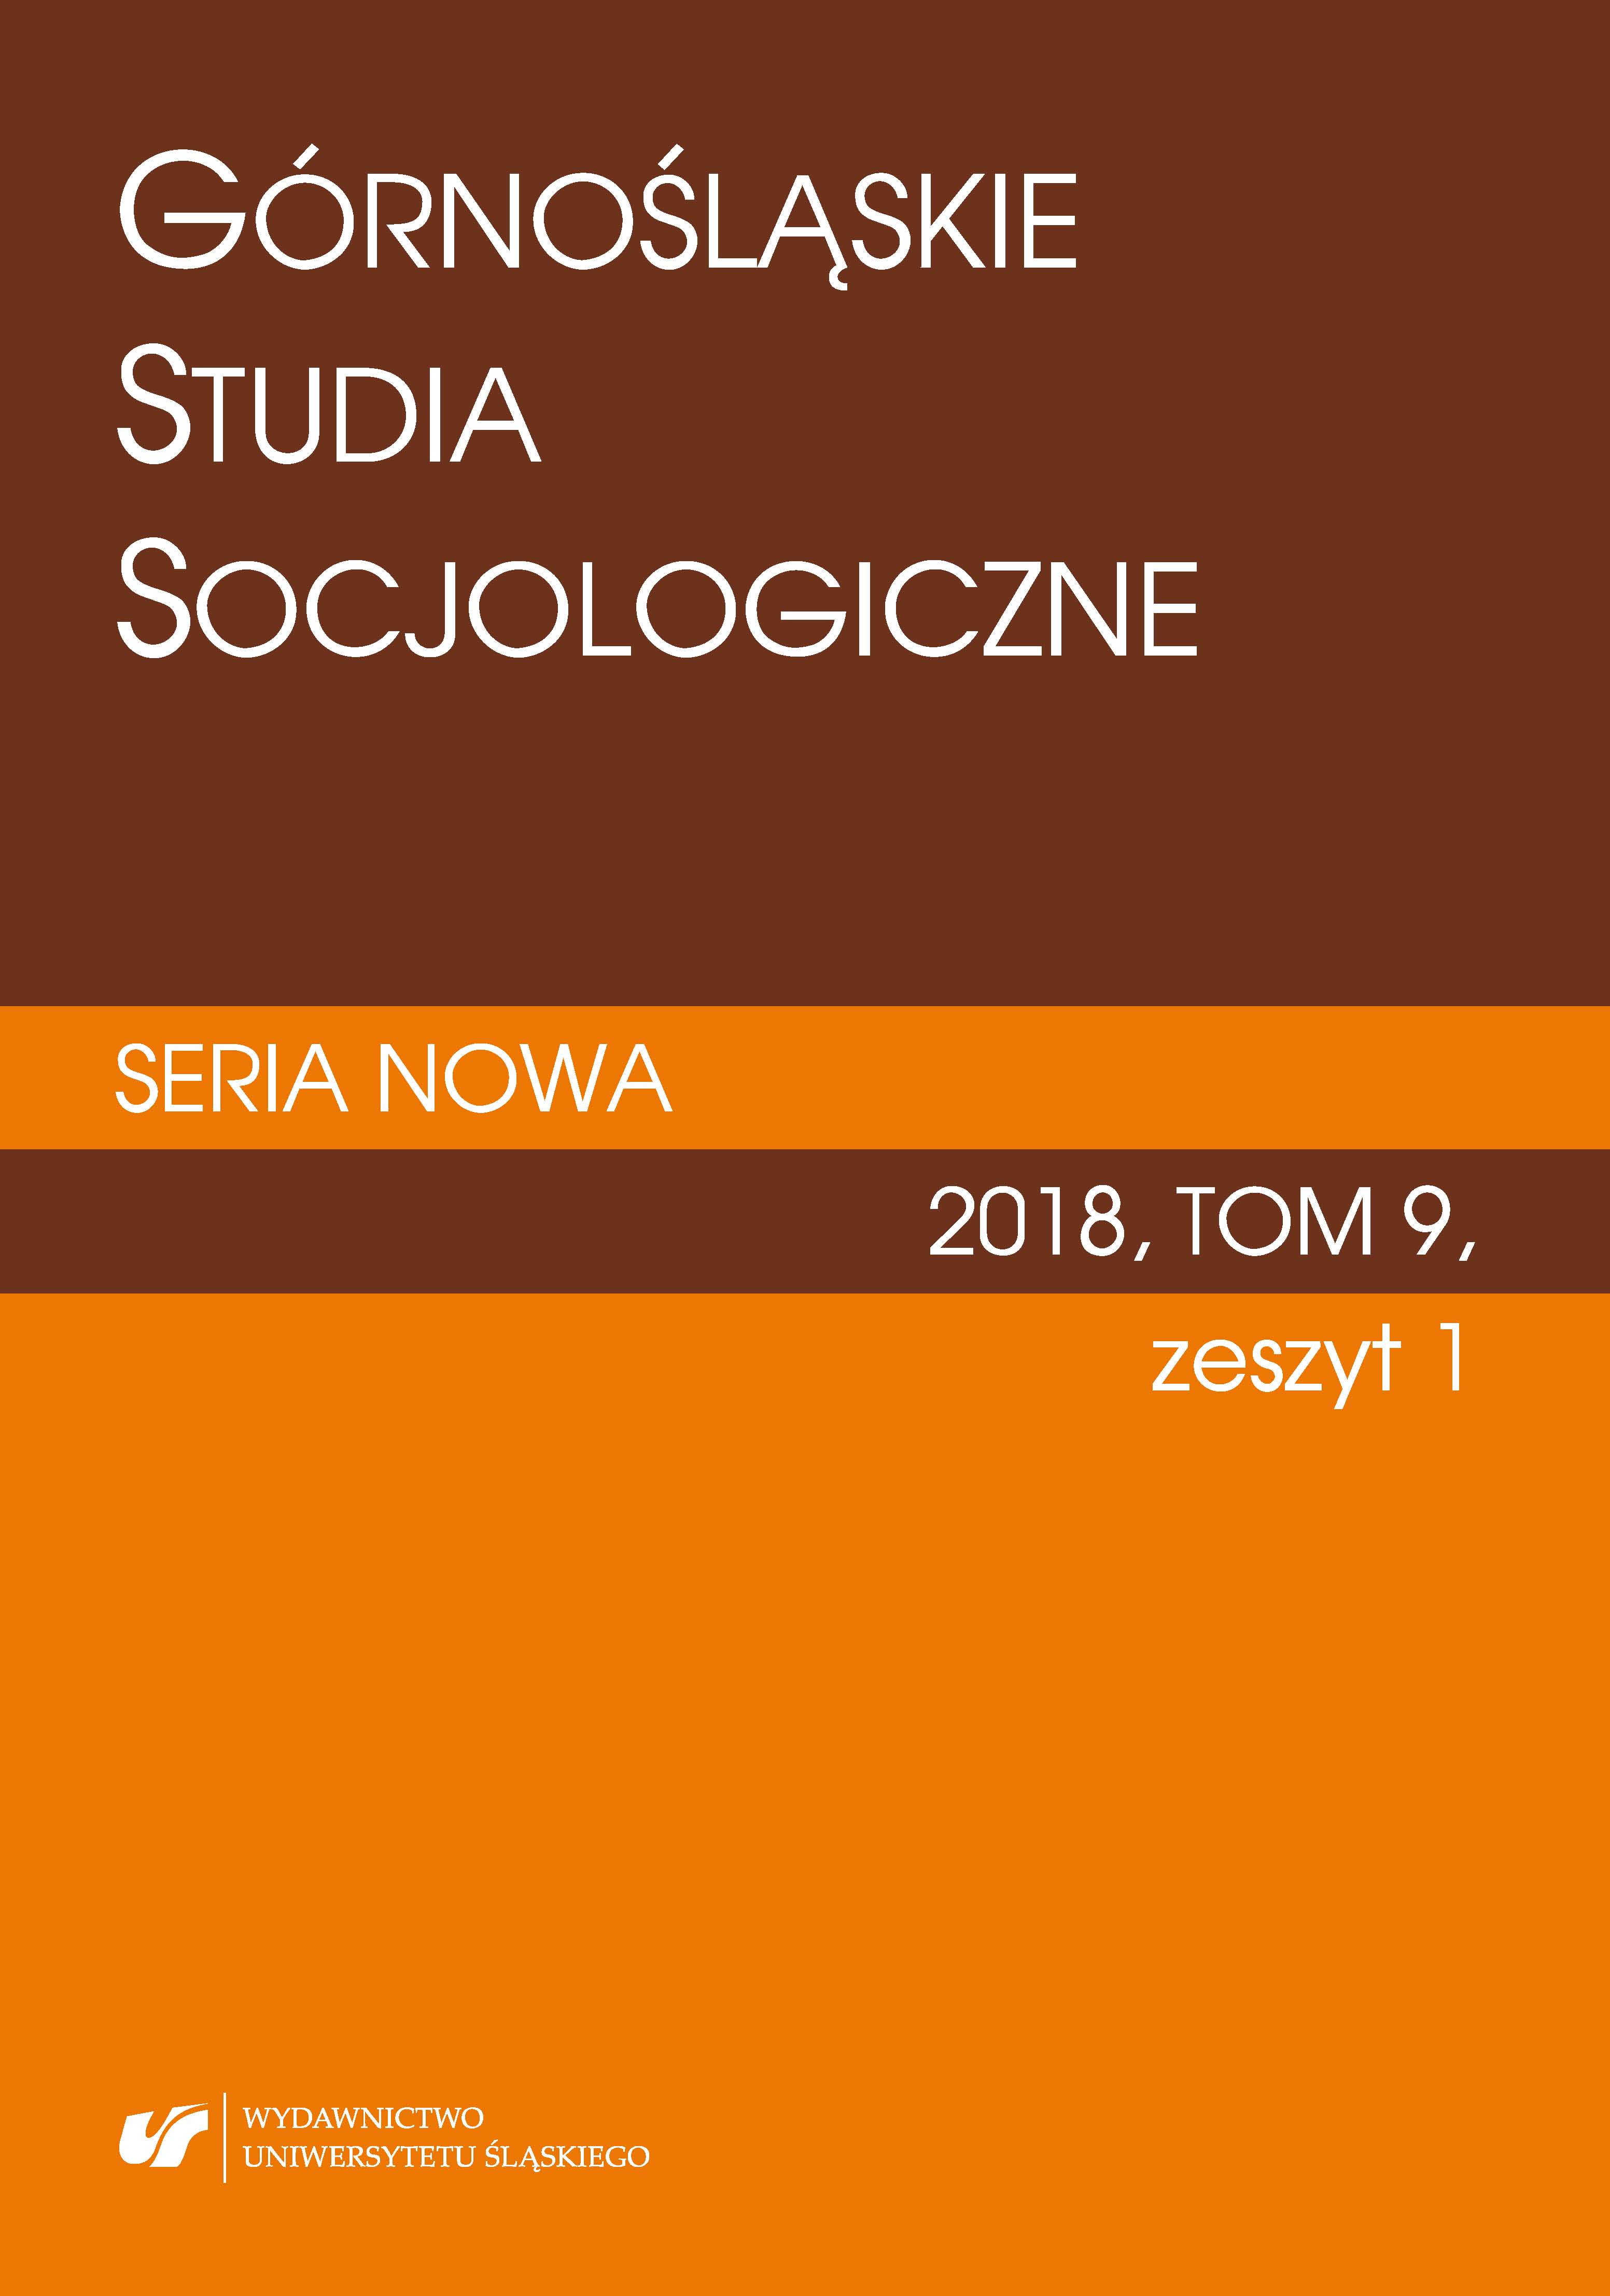 The Young Adults Combining Work and Education. The Case Study of Graduates of Sociology and Cultural Studies from SWPS University Cover Image